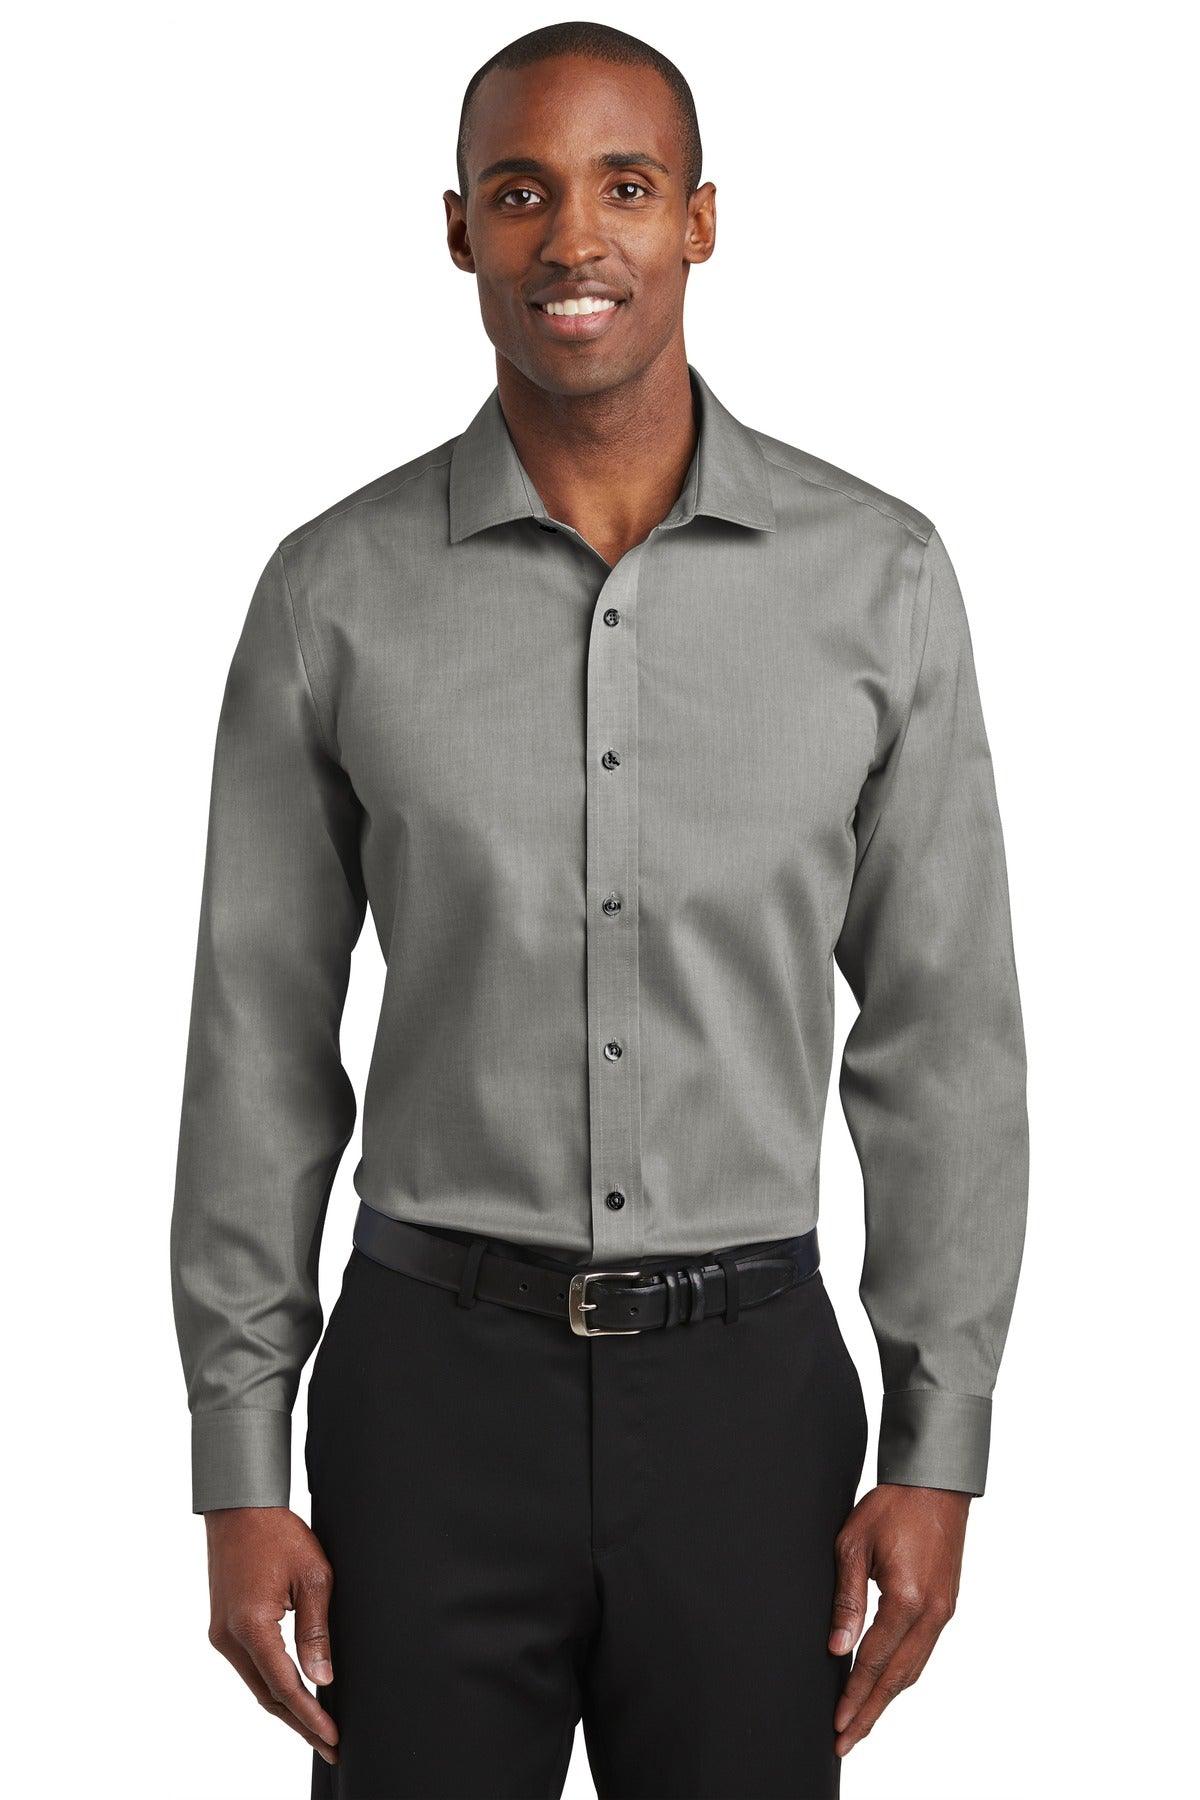 Red House Slim Fit Pinpoint Oxford Non-Iron Shirt. RH620 - Dresses Max